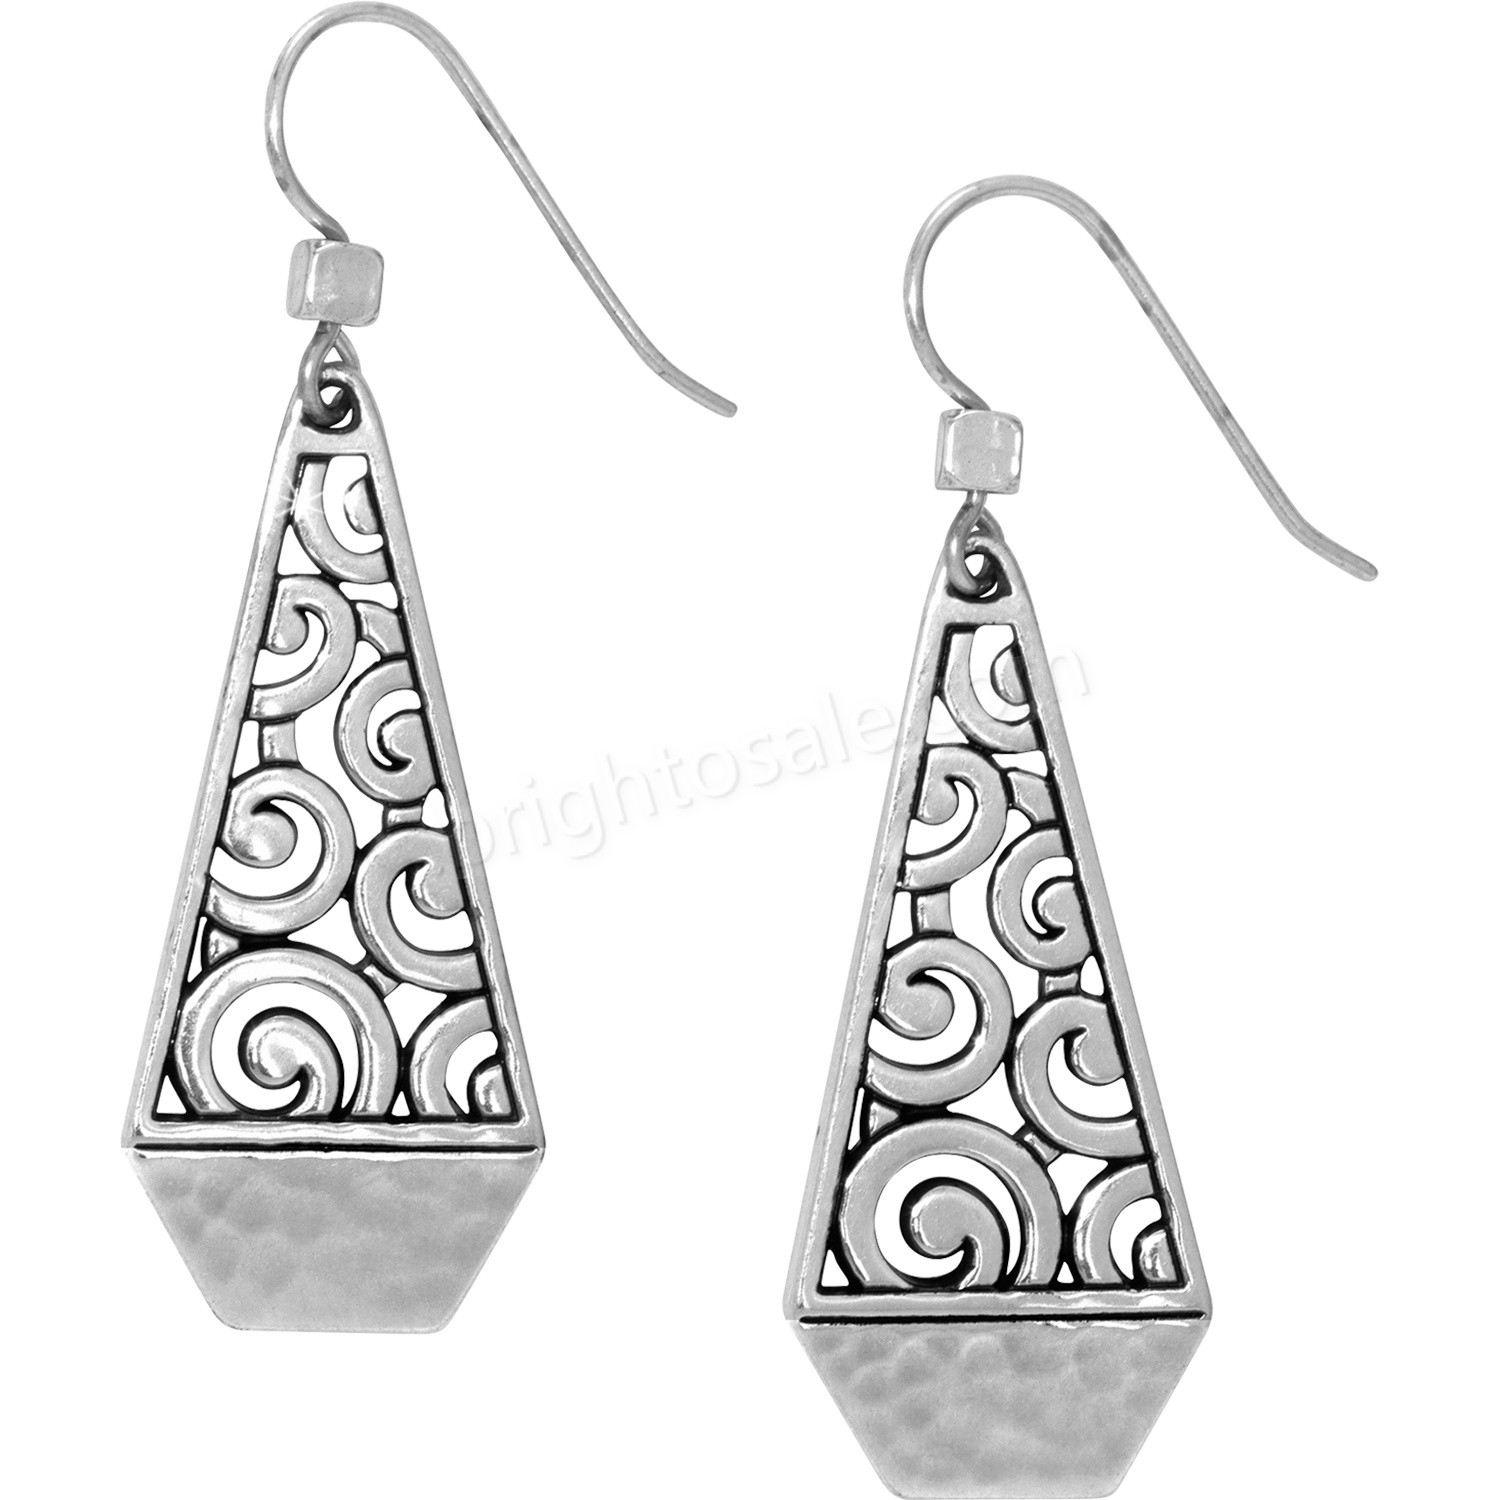 Brighton Collectibles & Online Discount Twinkle Bar French Wire Earrings - Brighton Collectibles & Online Discount Twinkle Bar French Wire Earrings